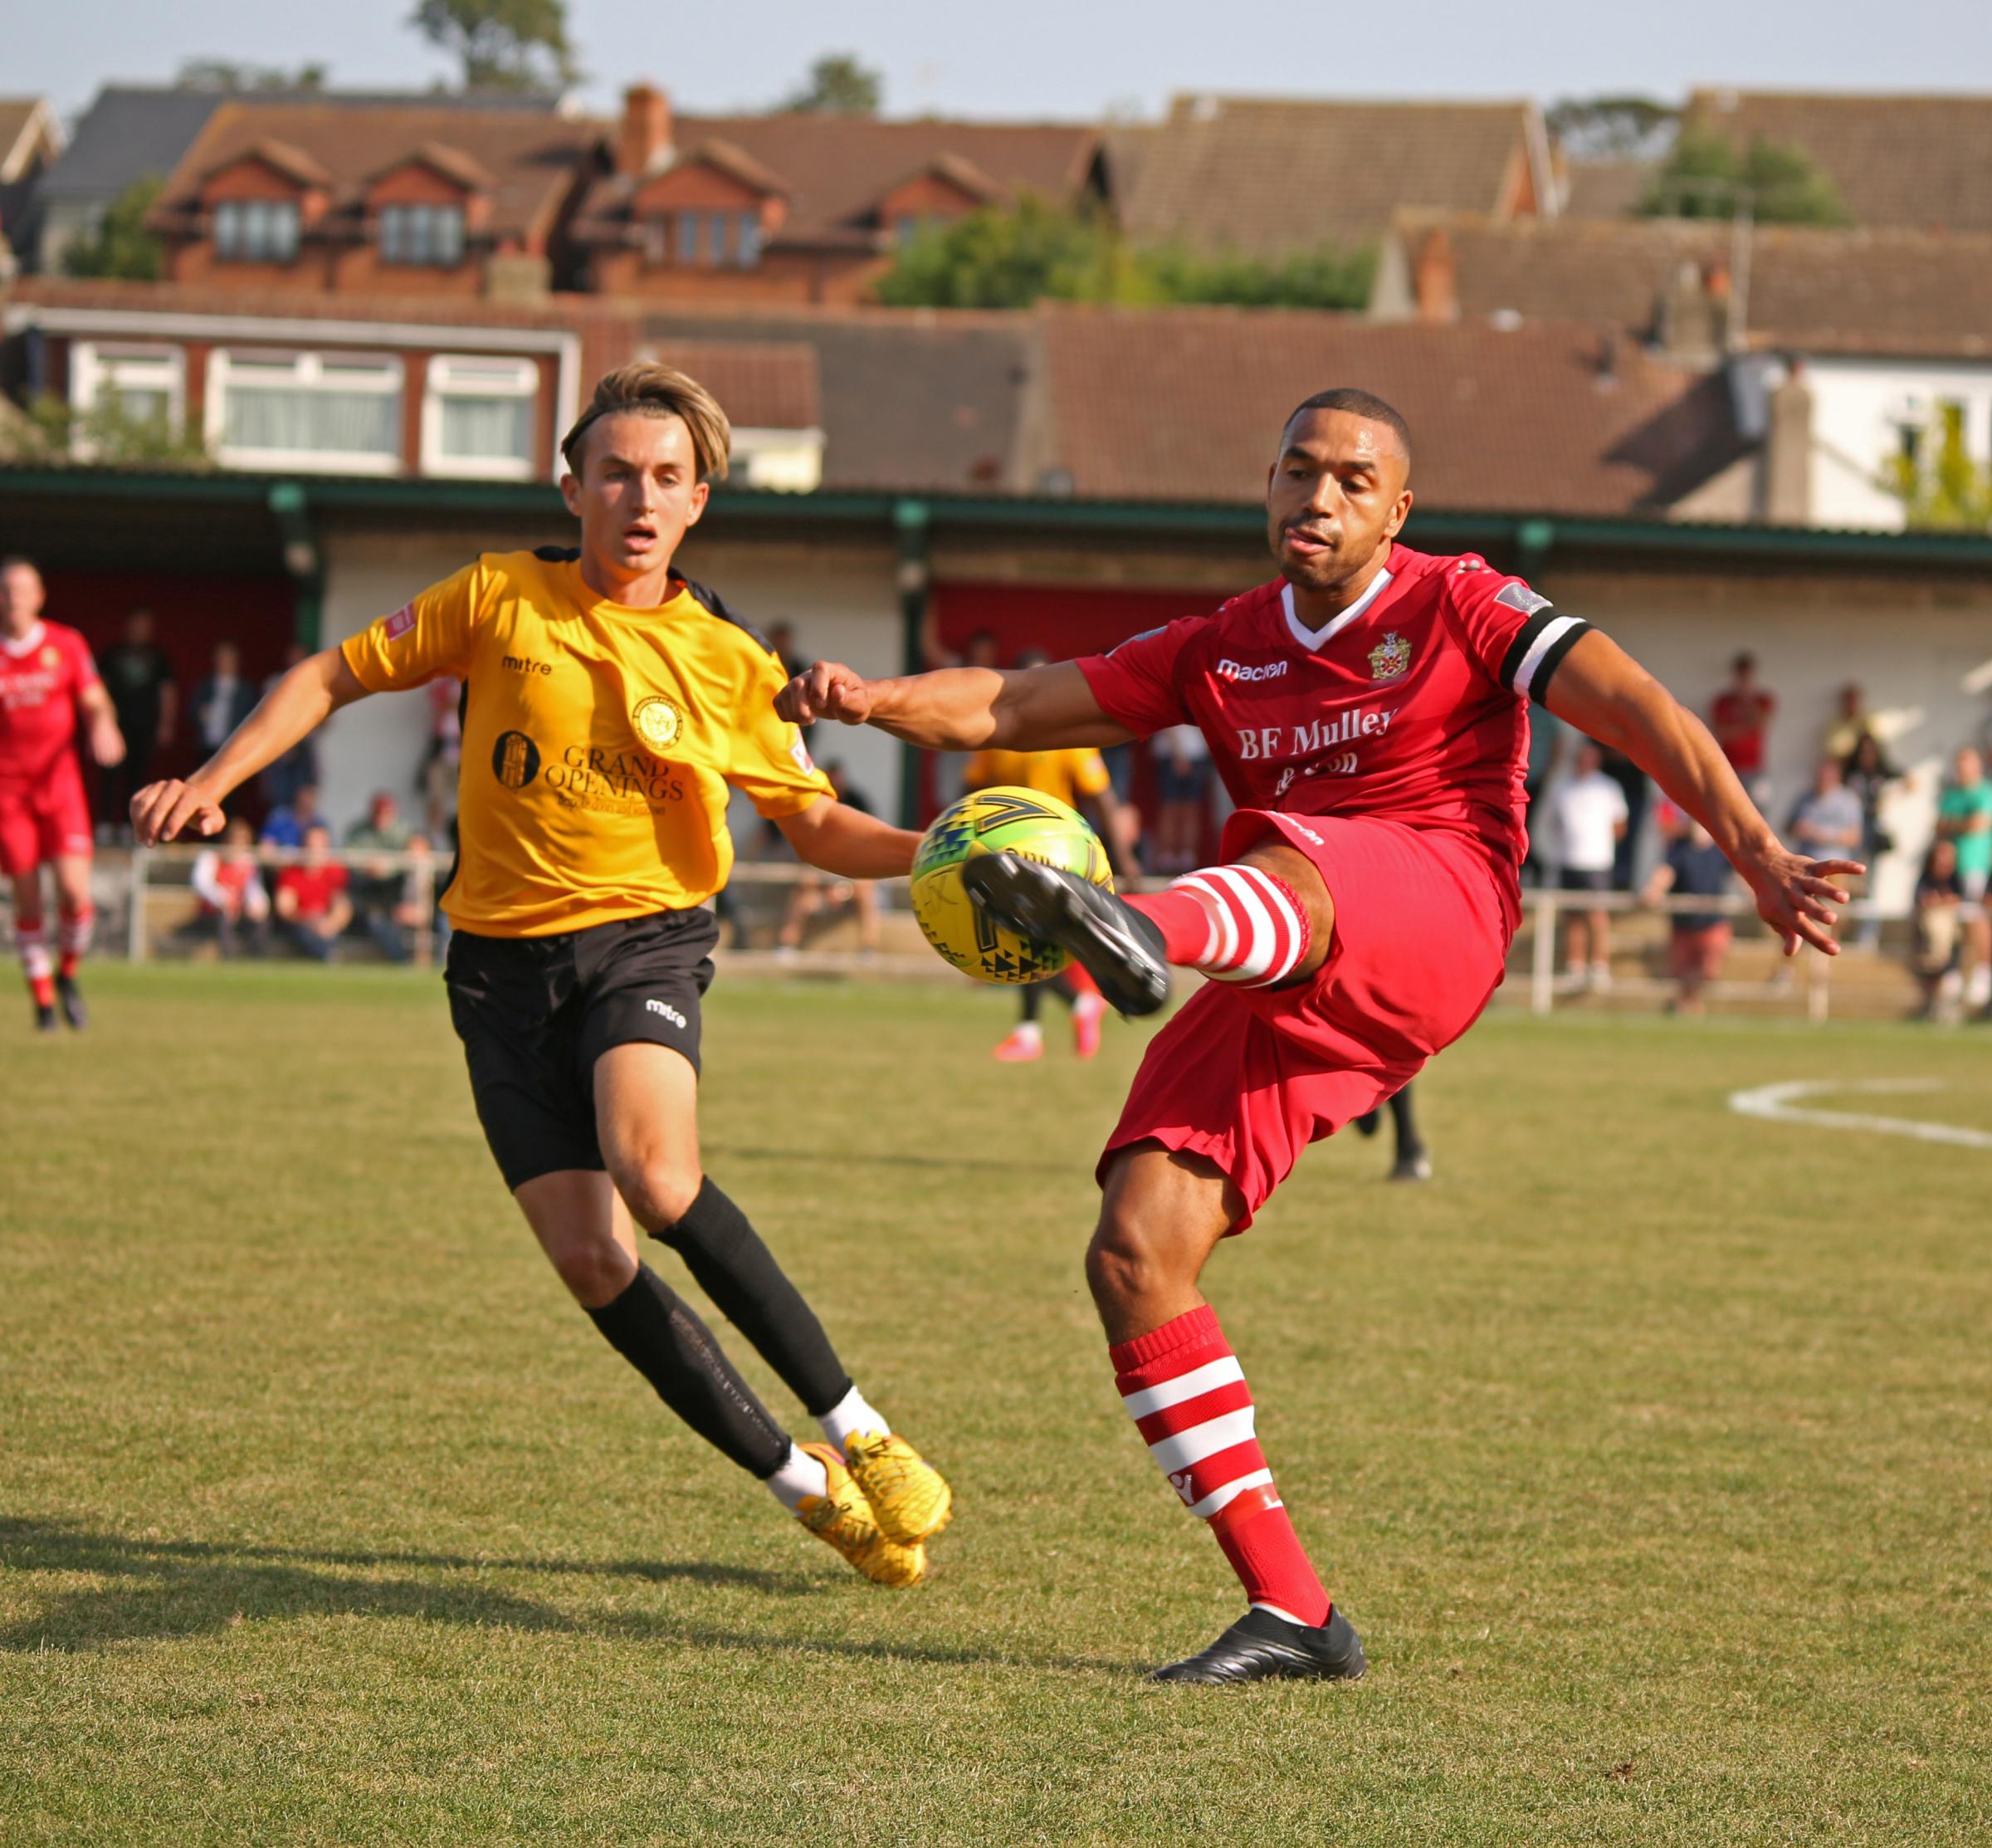 Lewwis Spence plays for Hornhurch (Photo by Hornchurch FC)